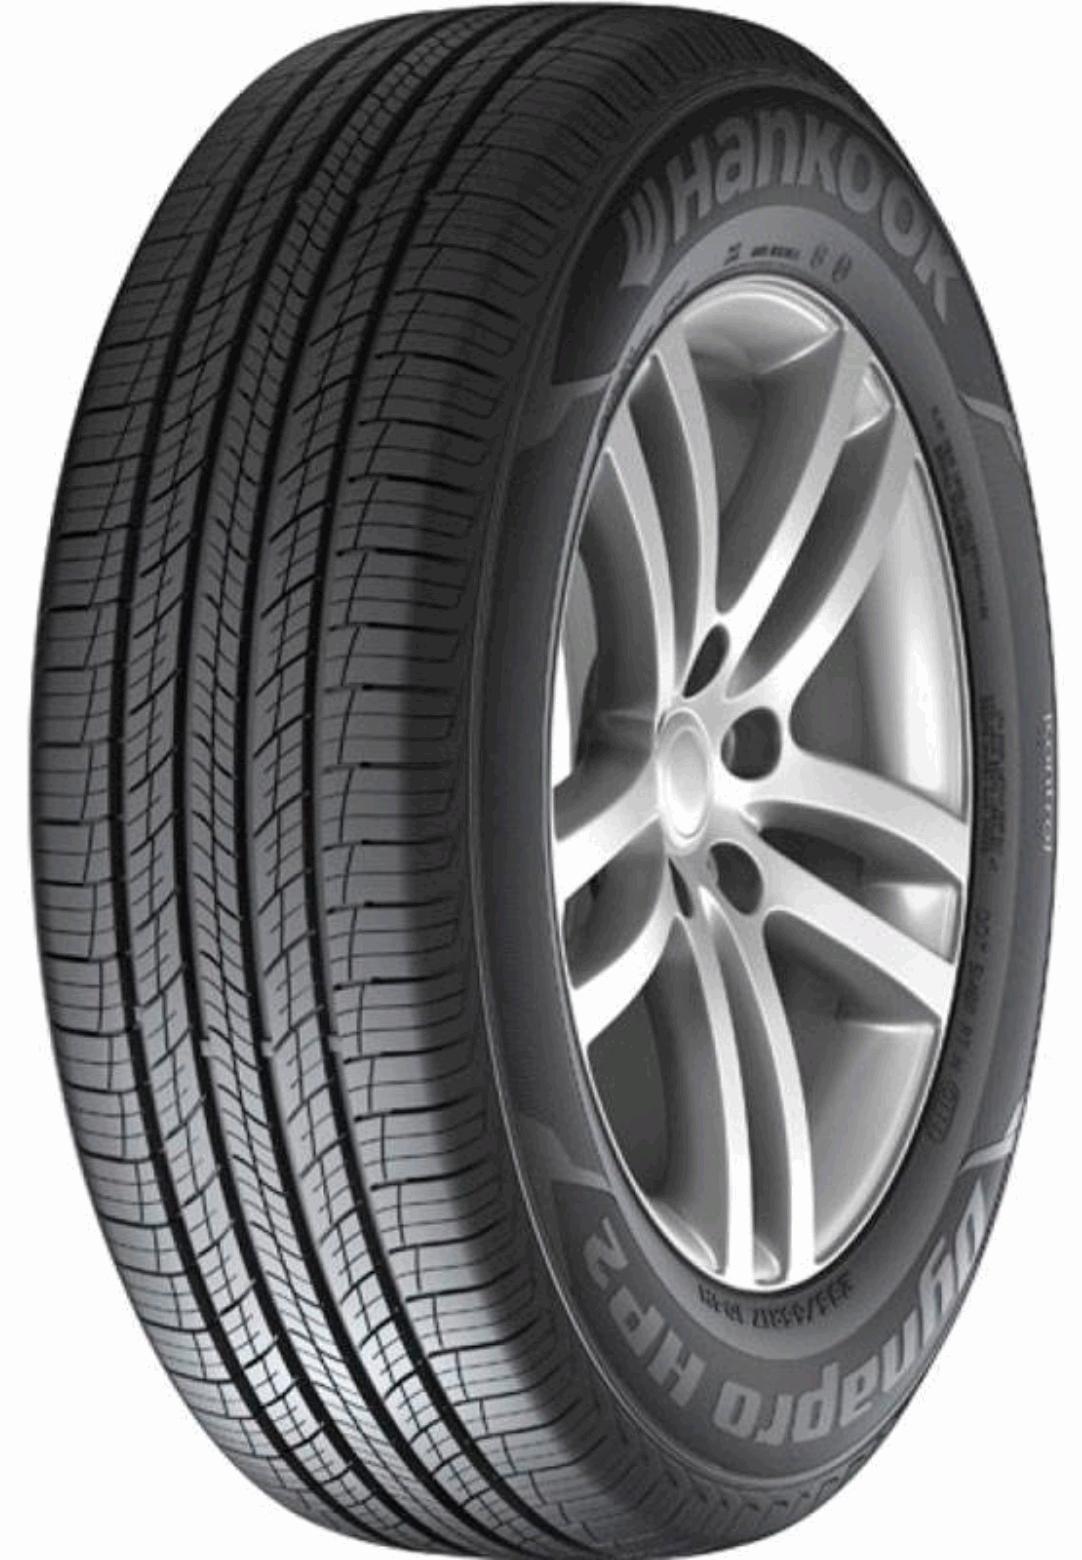 Hankook Dynapro HP2 RA33 - Tire Reviews and Tests